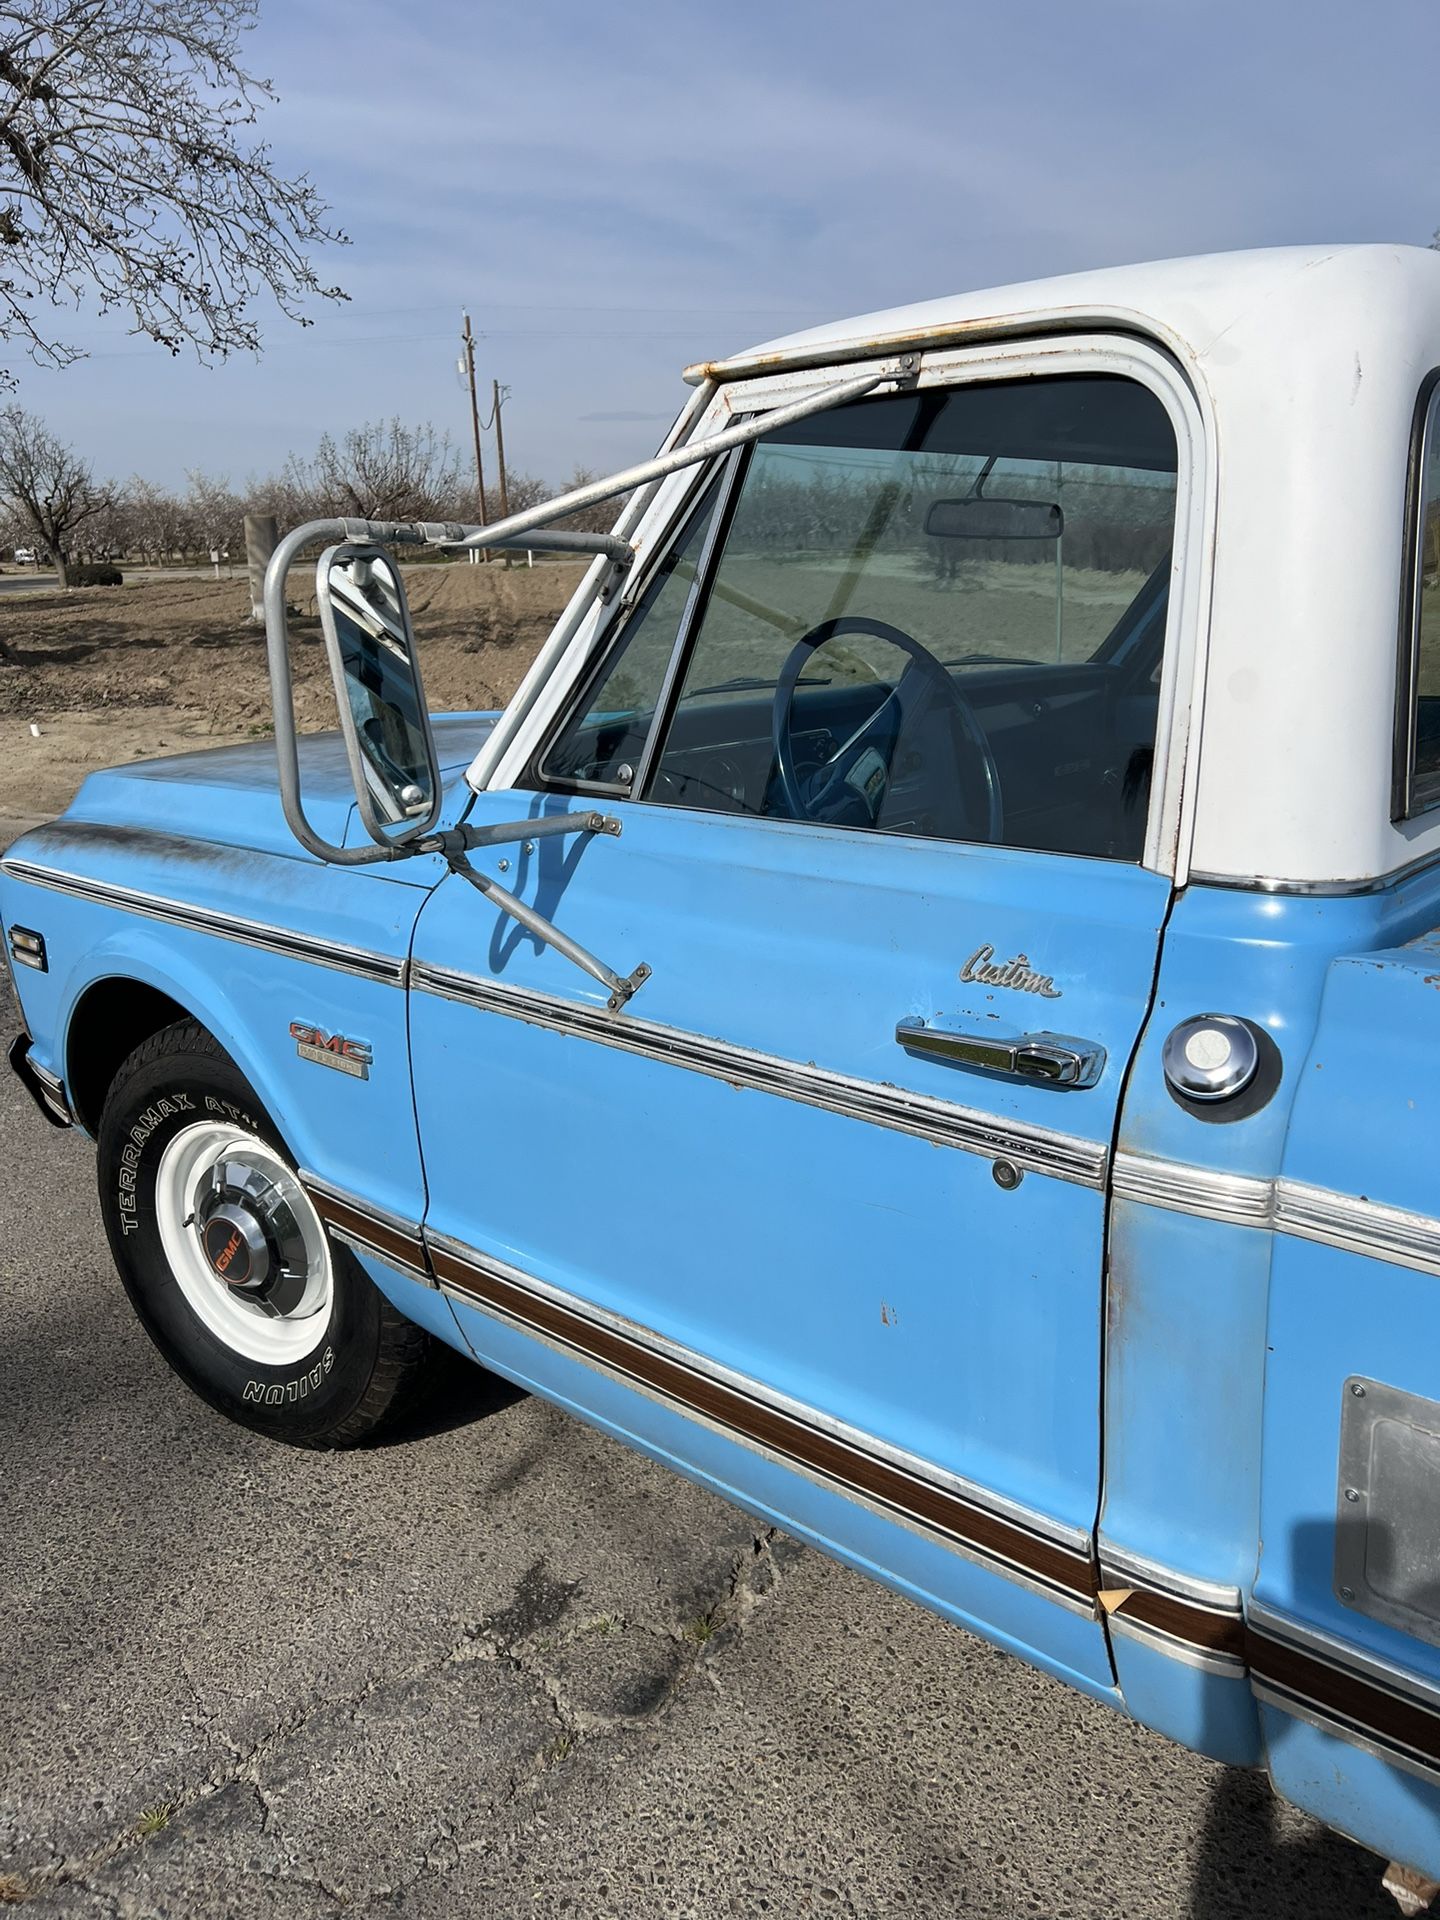 LVS for Sale in Selma, CA - OfferUp